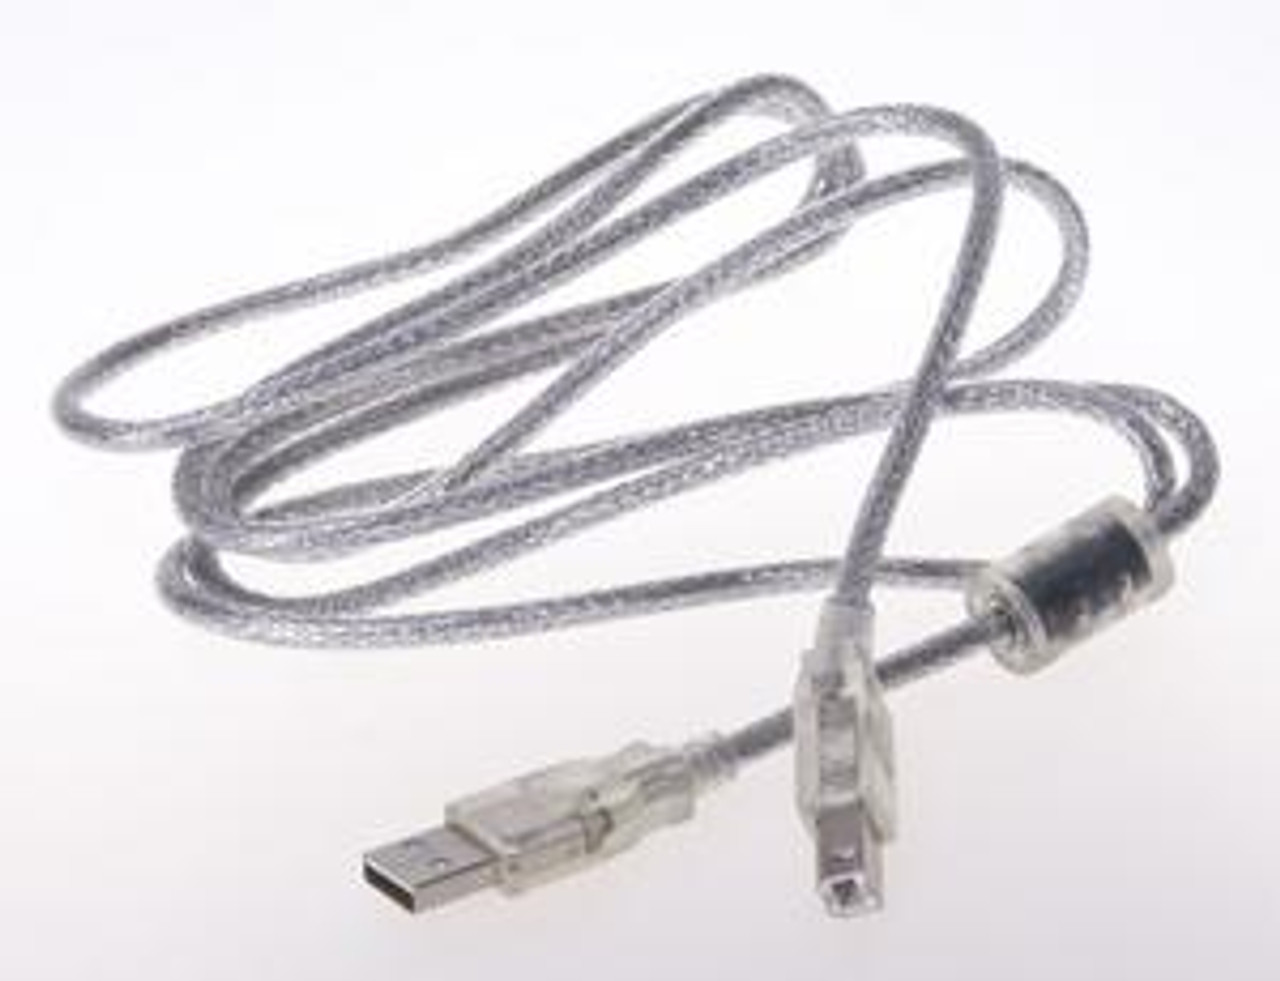 The Ultimate Guide to USB Cables - Consolidated Electronic Wire